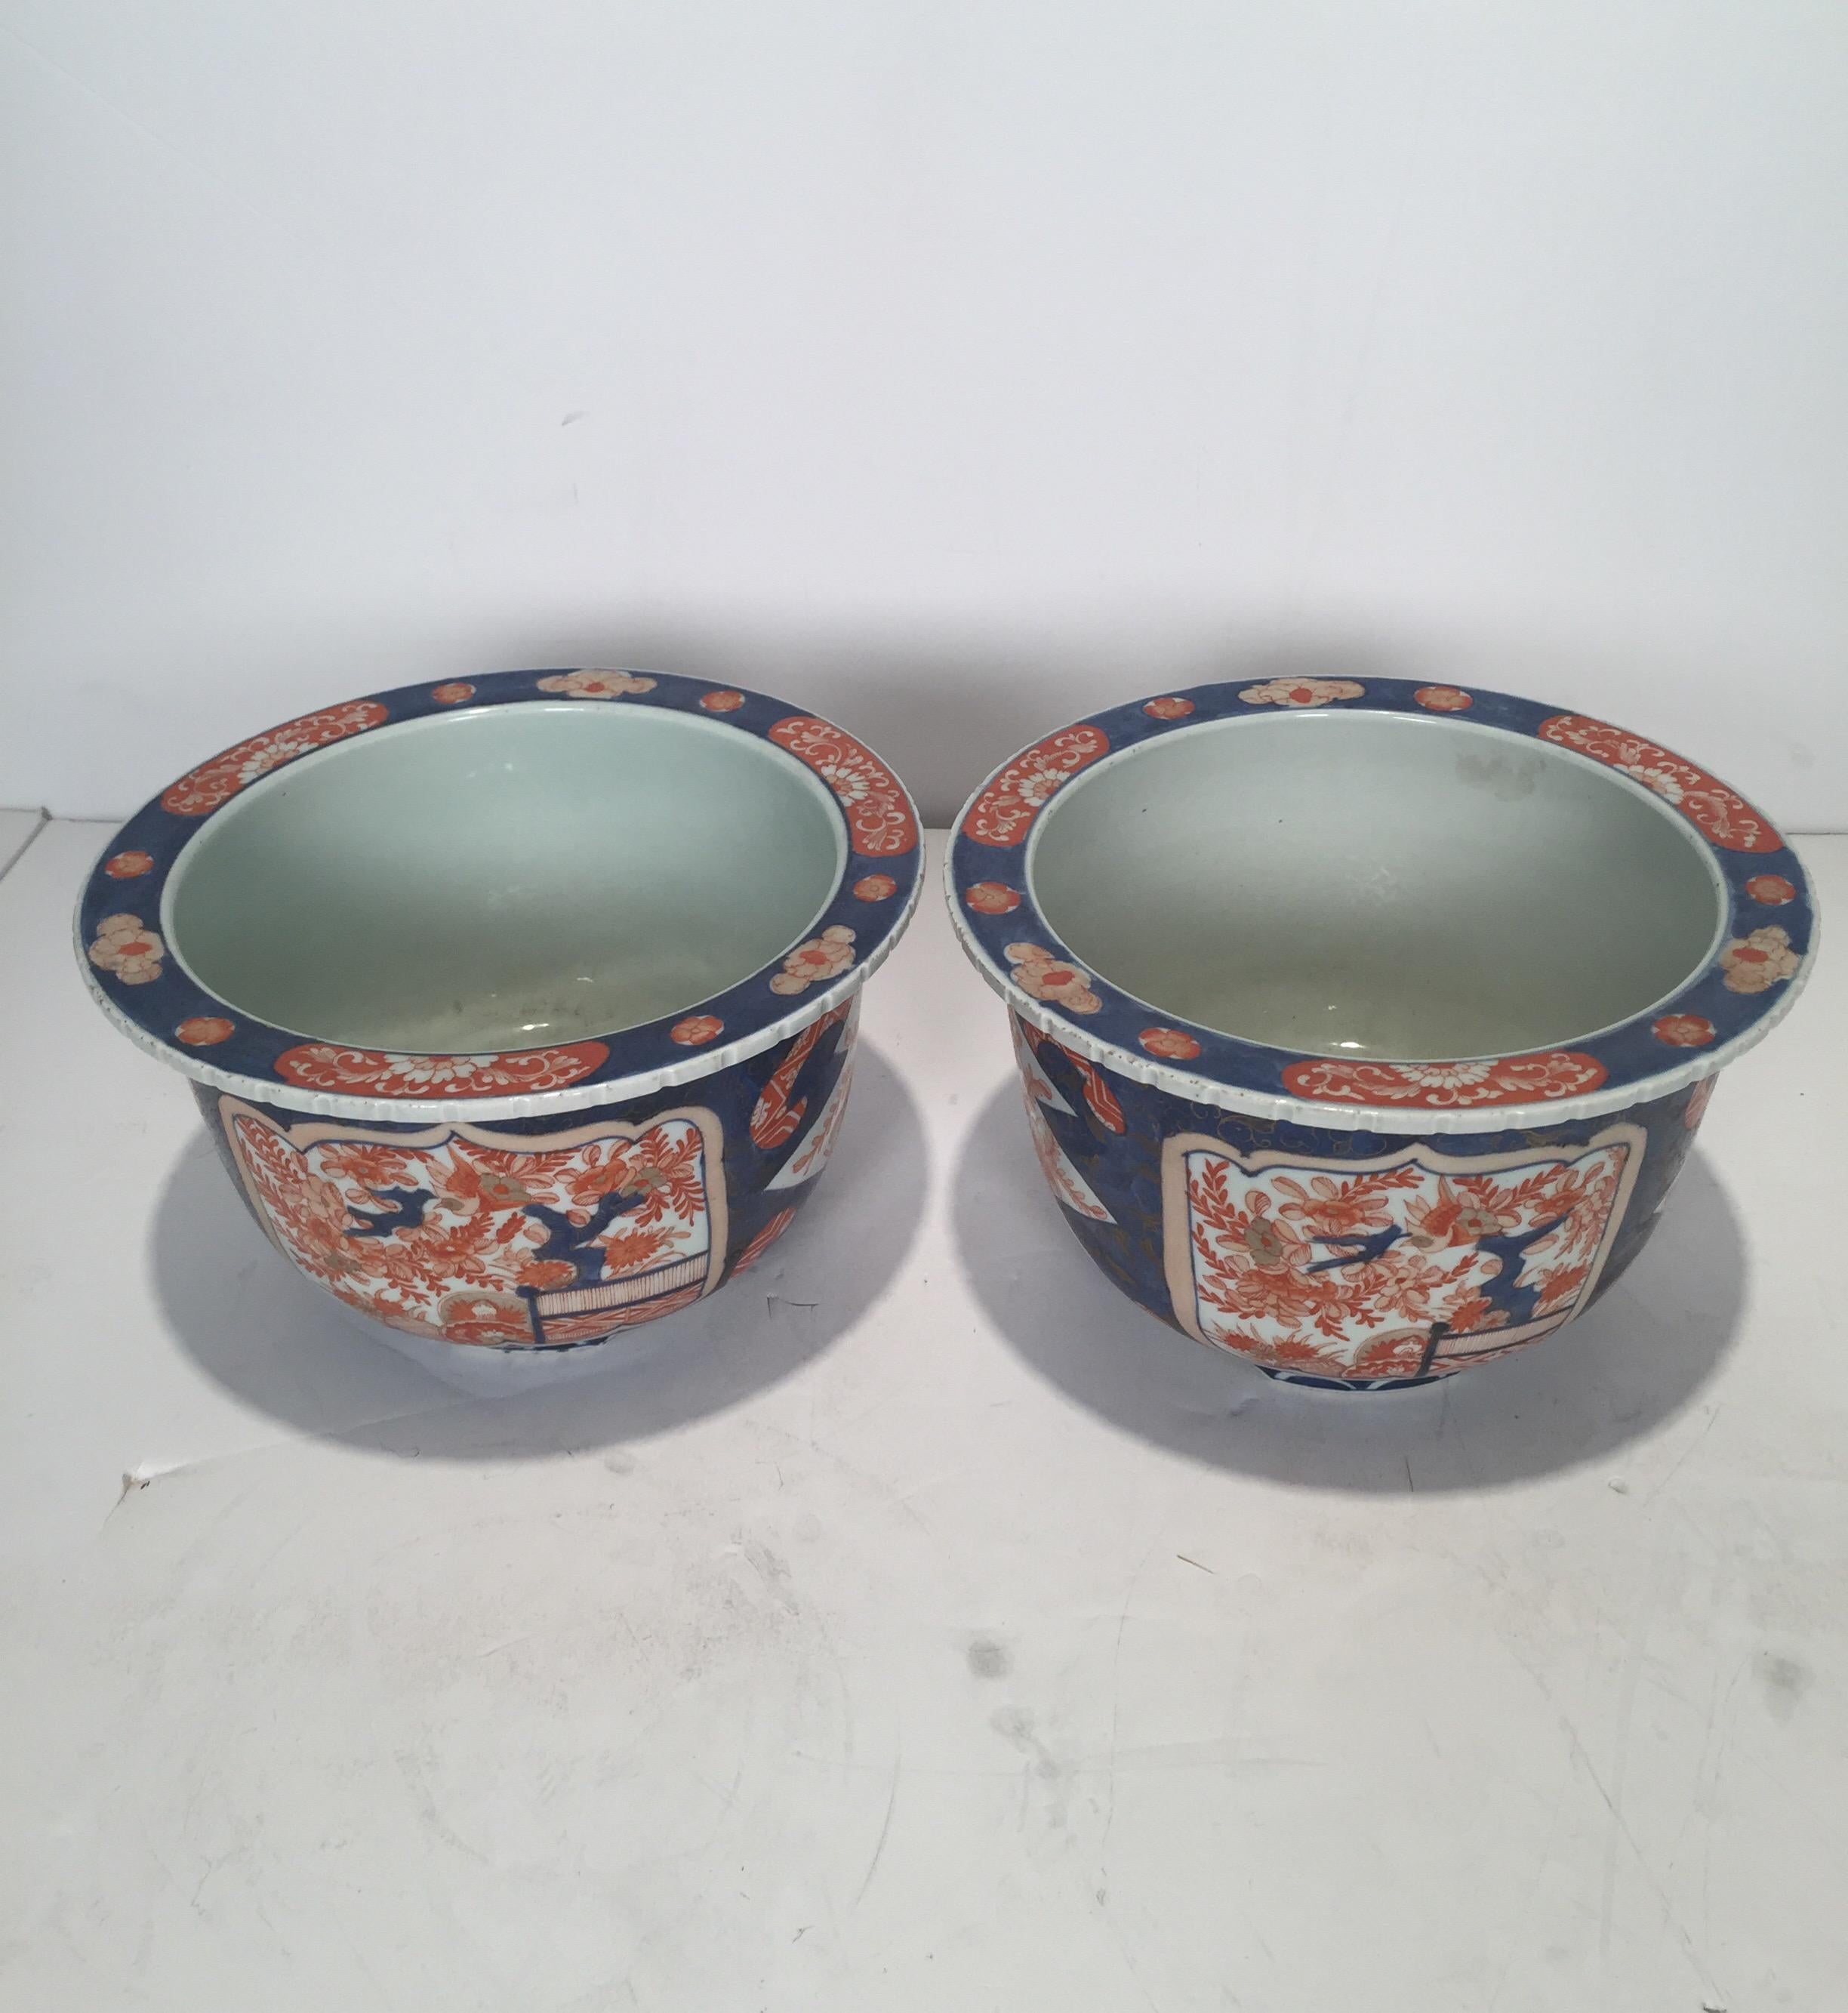 A pair of mid-19th century porcelain Japanese Imari planters, a rare footed pair done in an 18th century design.